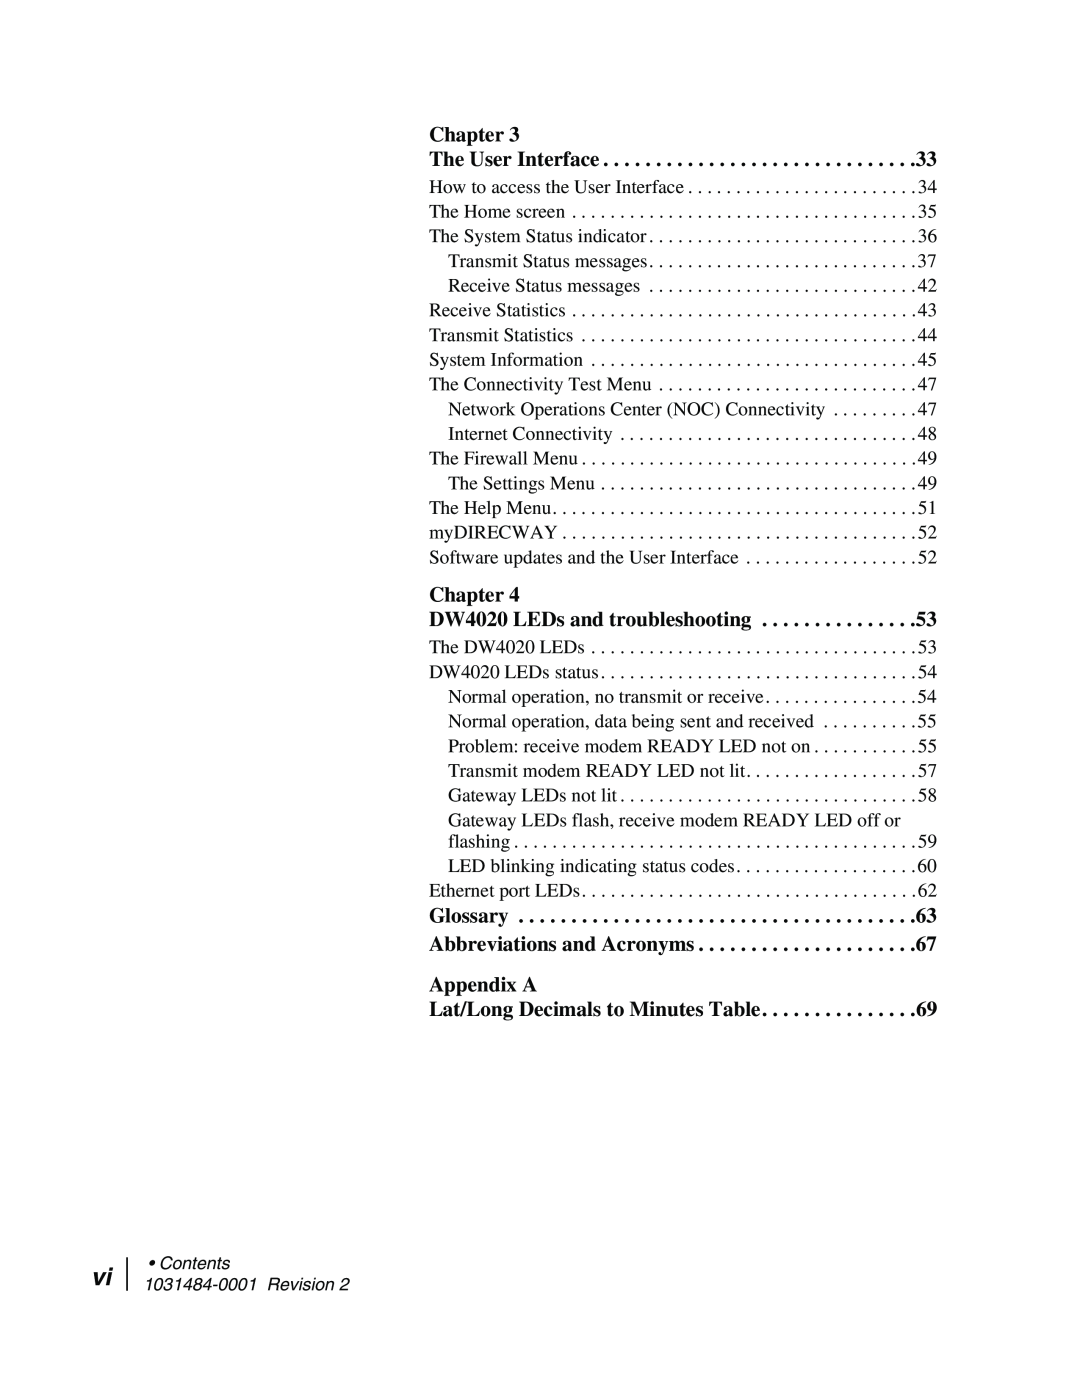 Hughes manual Chapter The User Interface, Chapter DW4020 LEDs and troubleshooting, Contents 1031484-0001 Revision 